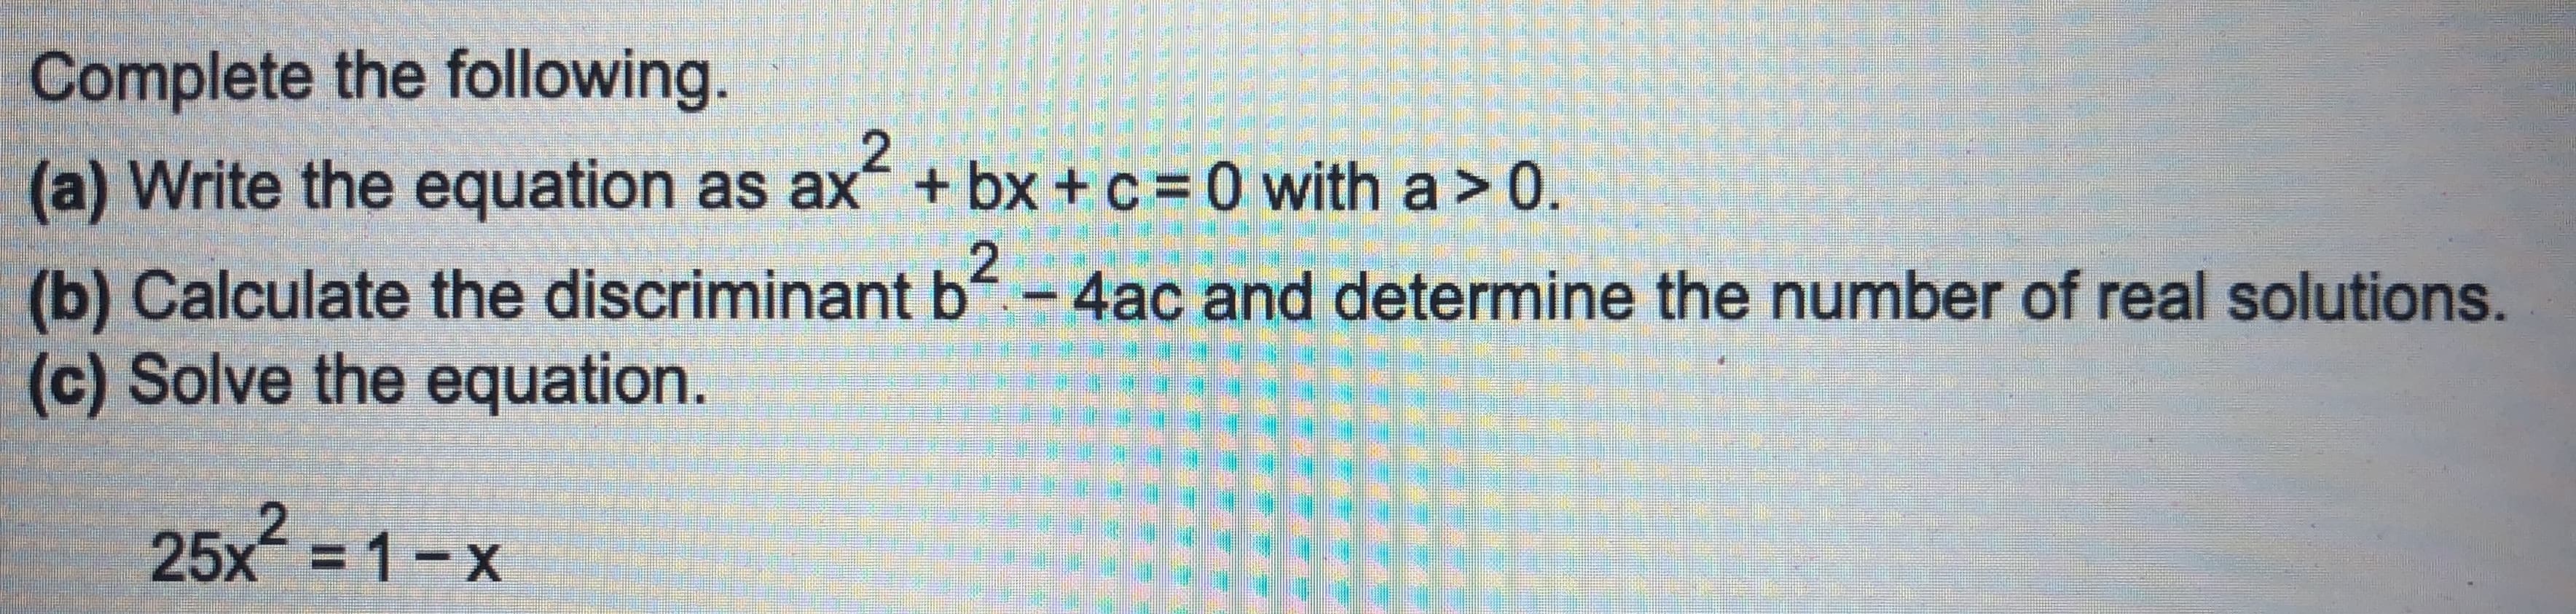 Complete the following.
(a) Write the equation as ax + bx + c= 0 with a> 0.
(b) Calculate the discriminant b - 4ac and determine the number of real solutions.
(c) Solve the equation.
25x = 1-x
